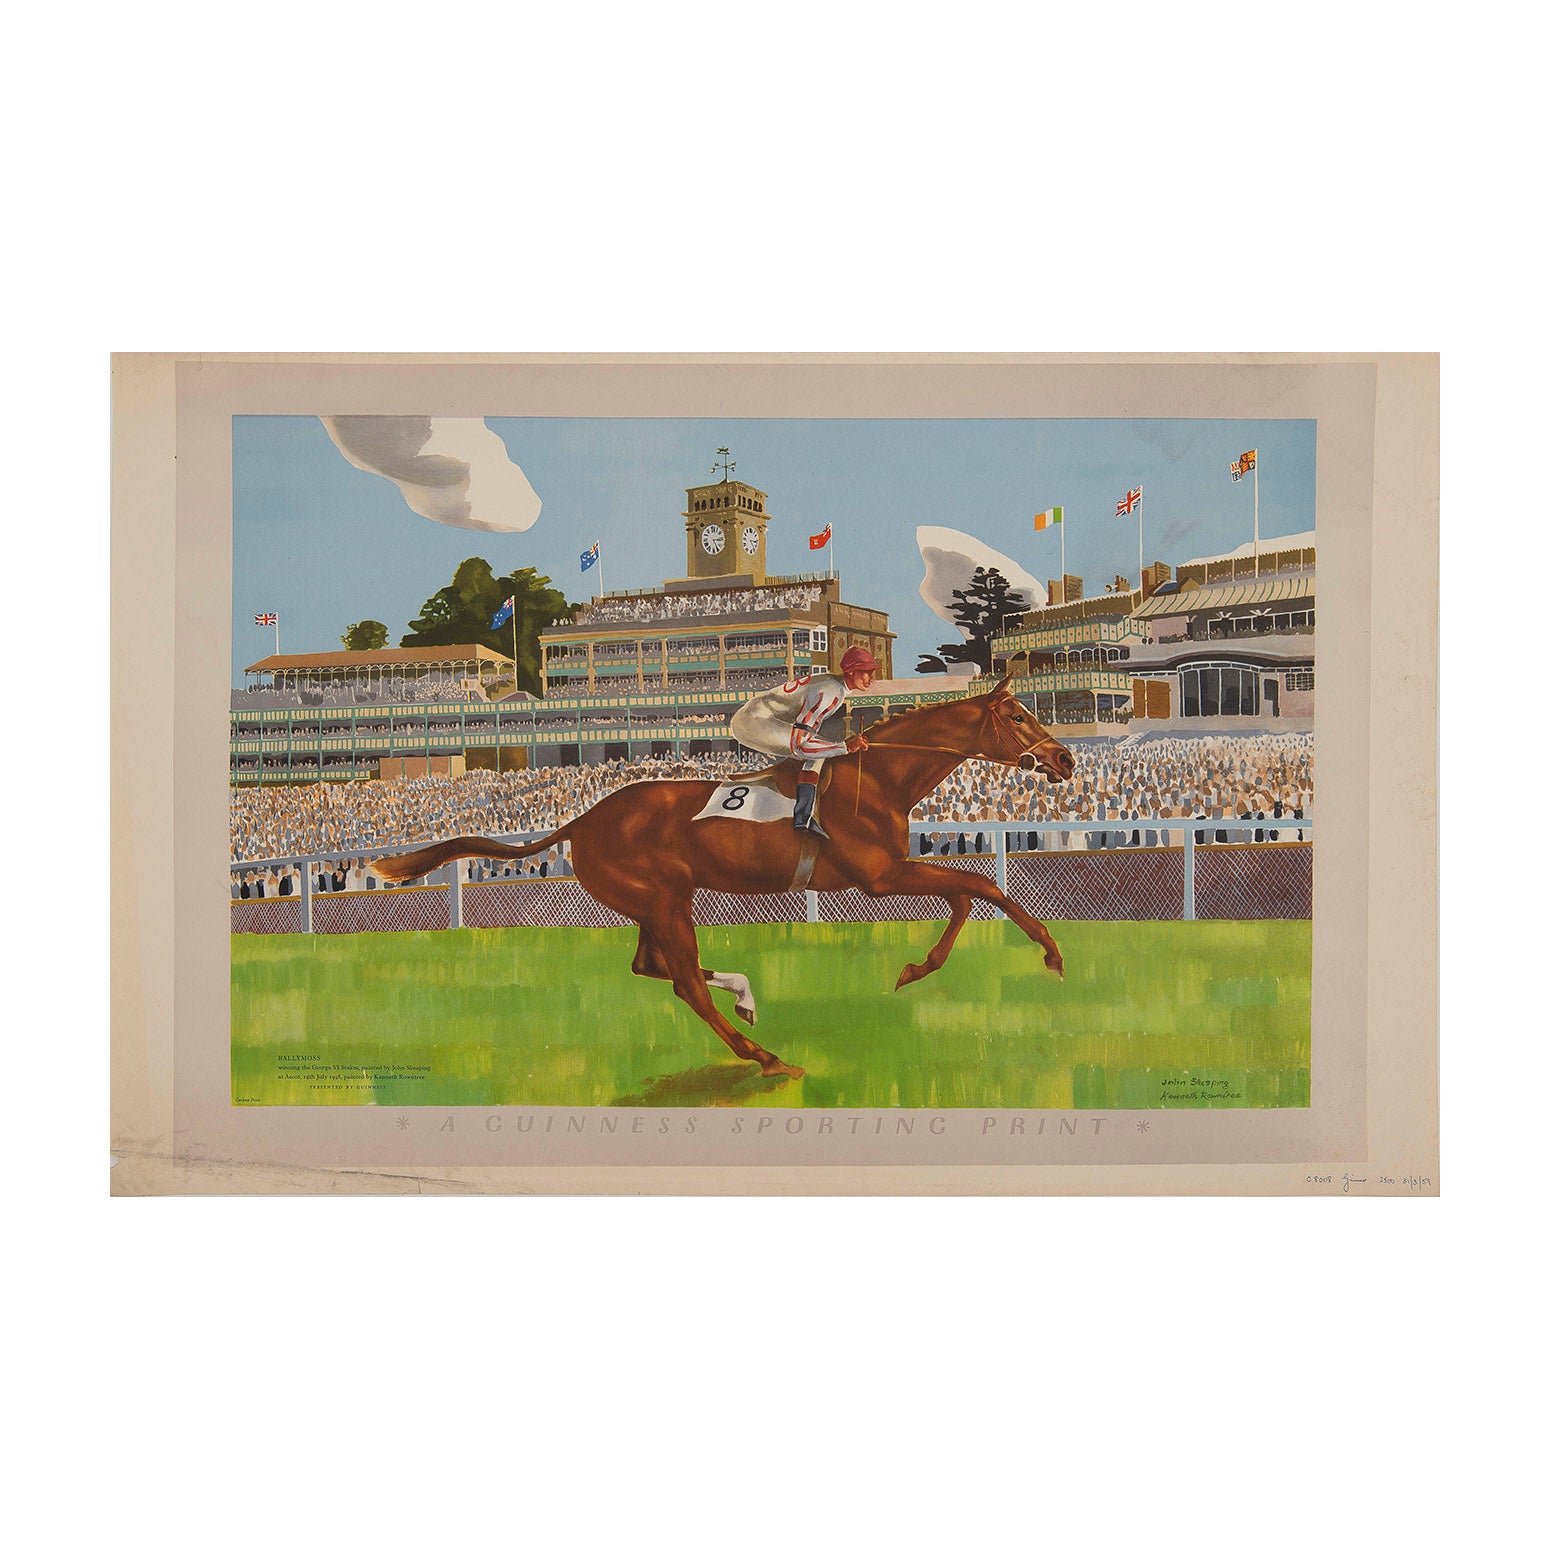 An original Guinness Sporting Print, Ballymoss winning the King George VI & Queen Elizabeth Stakes at Ascot, 19 July 1958, painted by John Skeaping and Kenneth Rowntree, 1959. This is a proof version from the Curwen Press, hand dated ‘31/3/59’